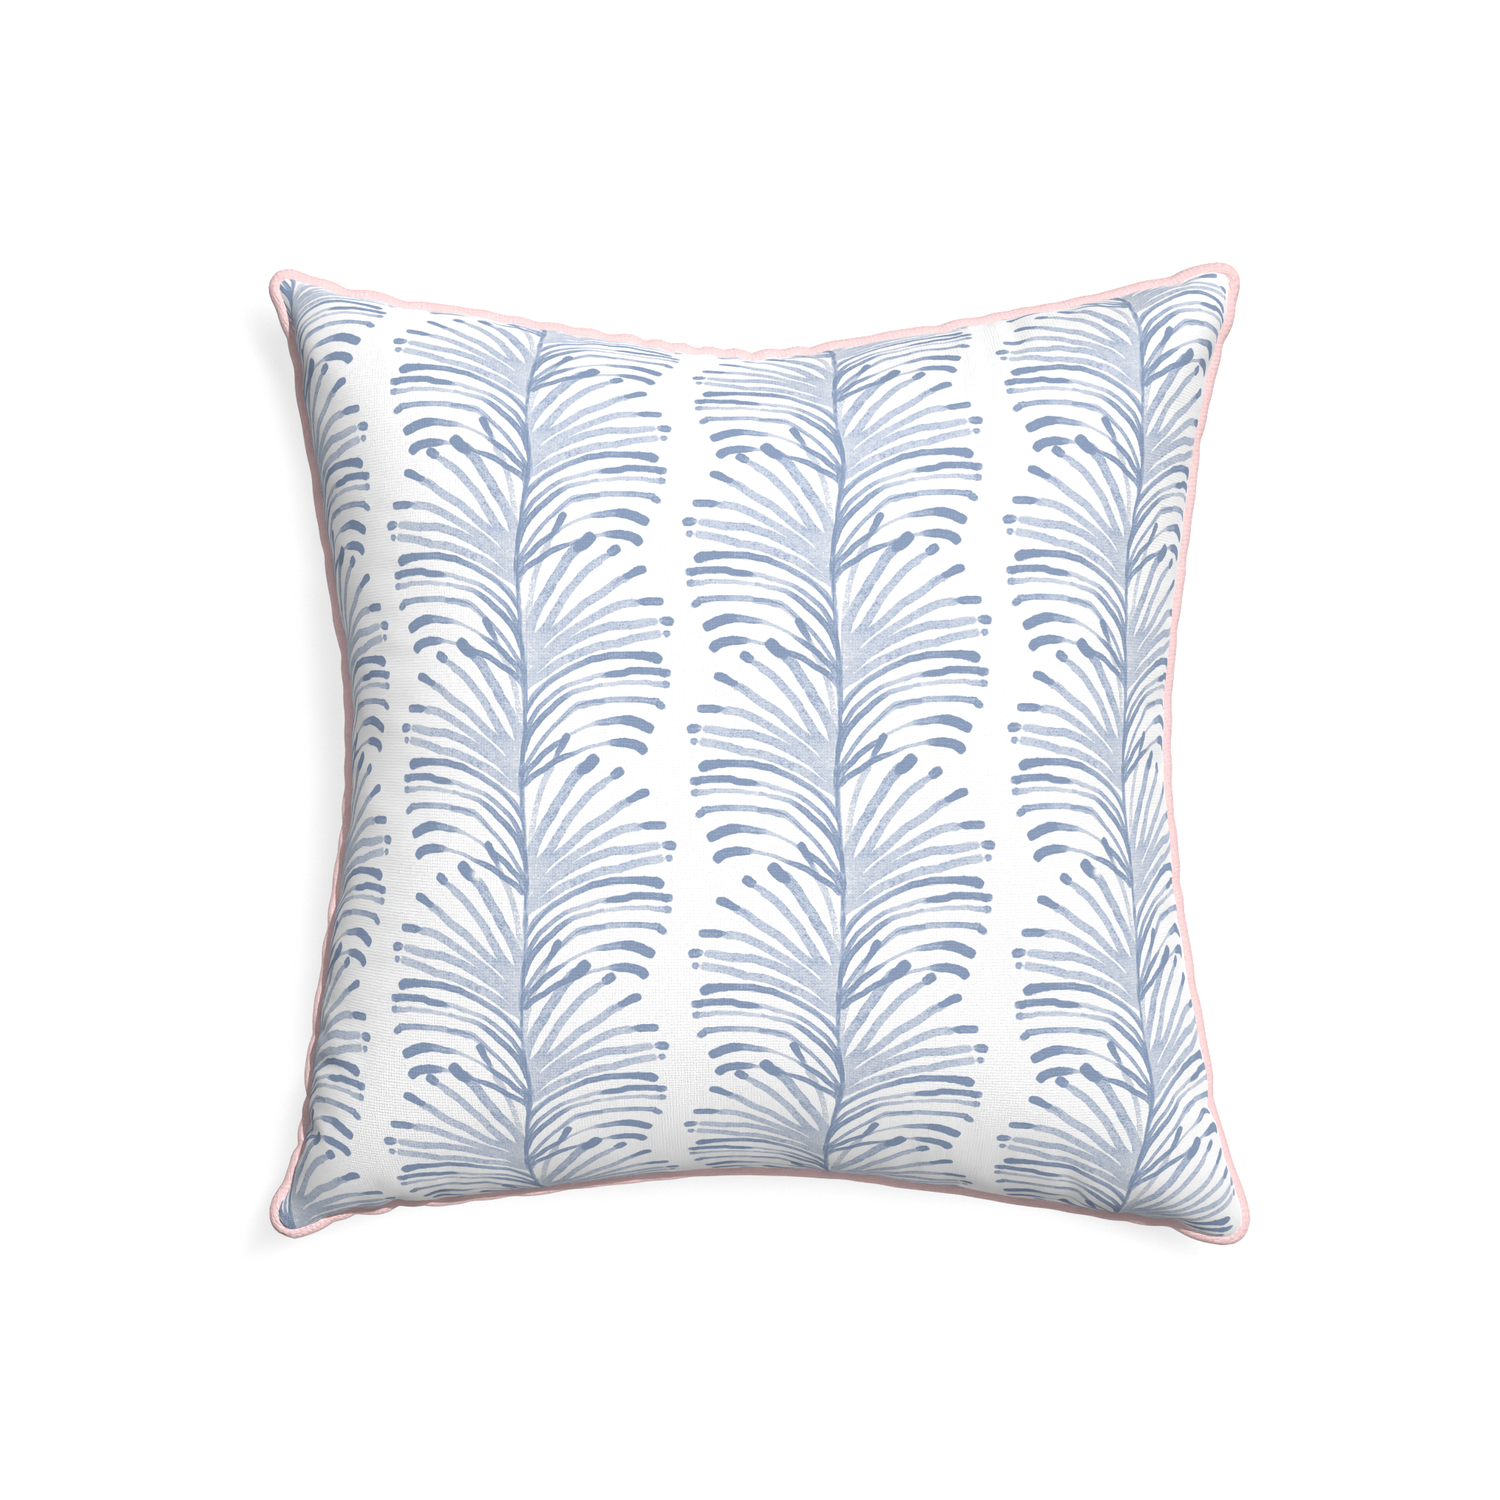 22-square emma sky custom sky blue botanical stripepillow with petal piping on white background